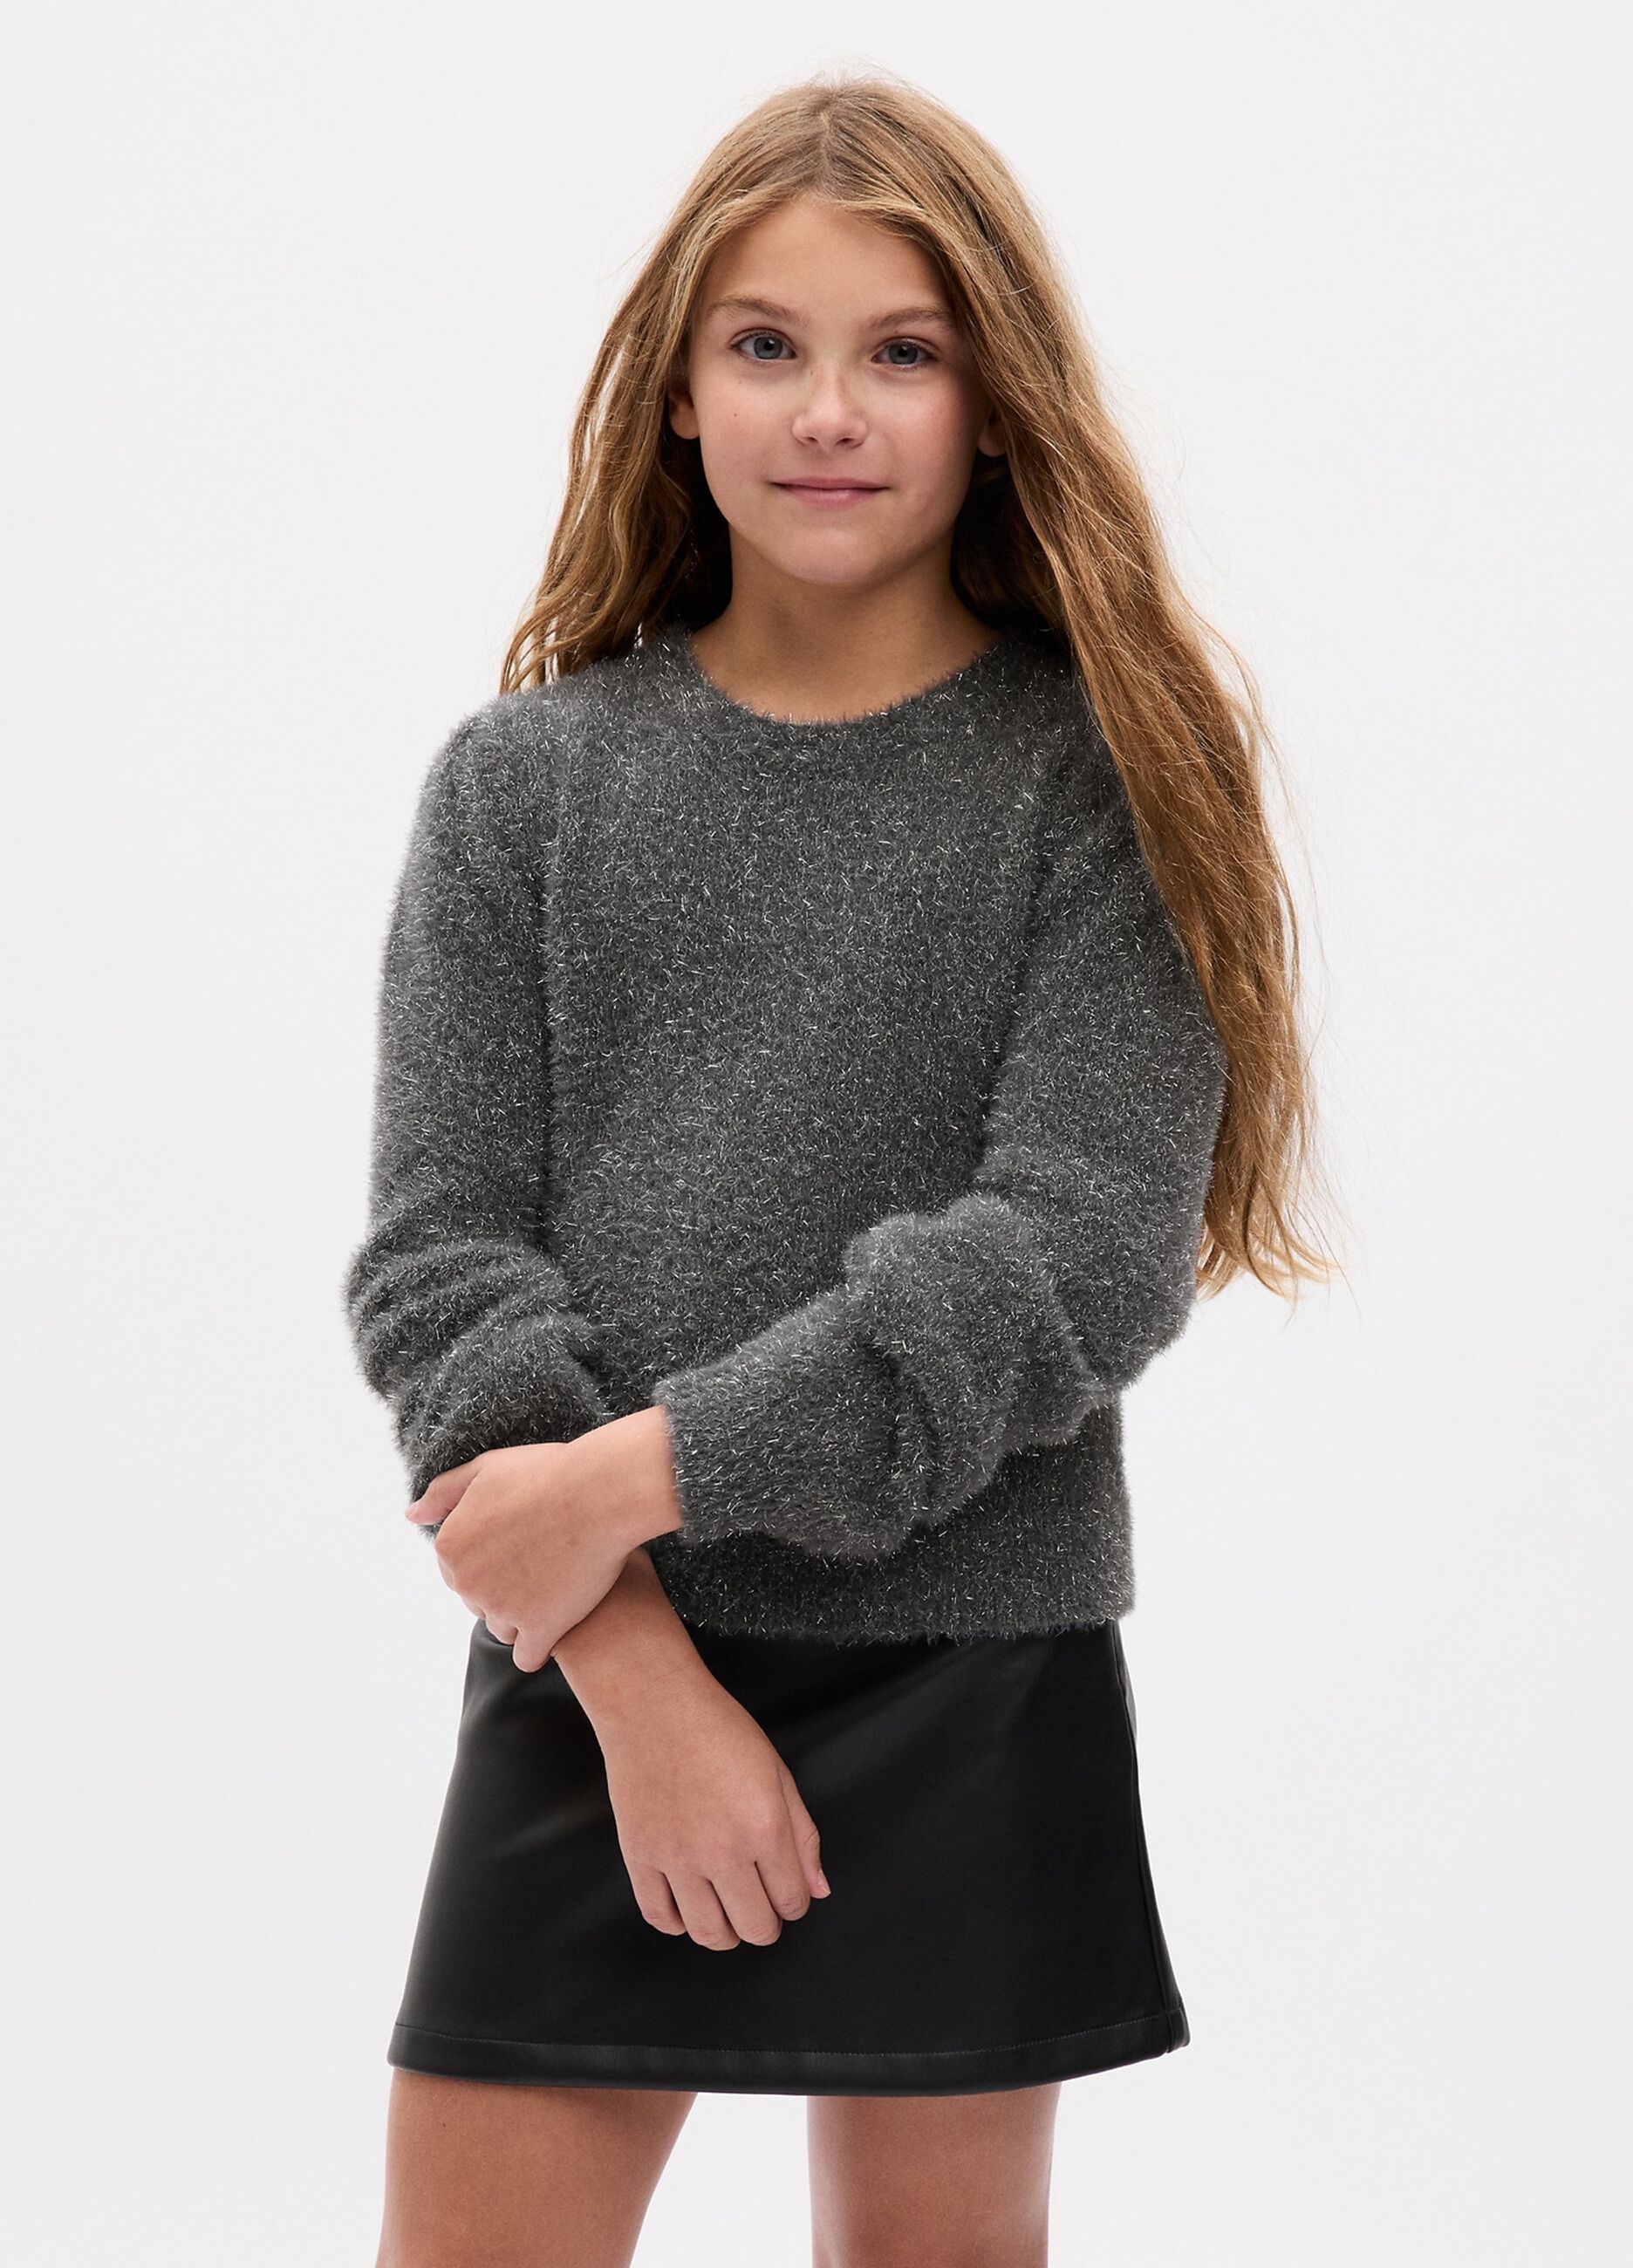 Furry yarn pullover with lurex